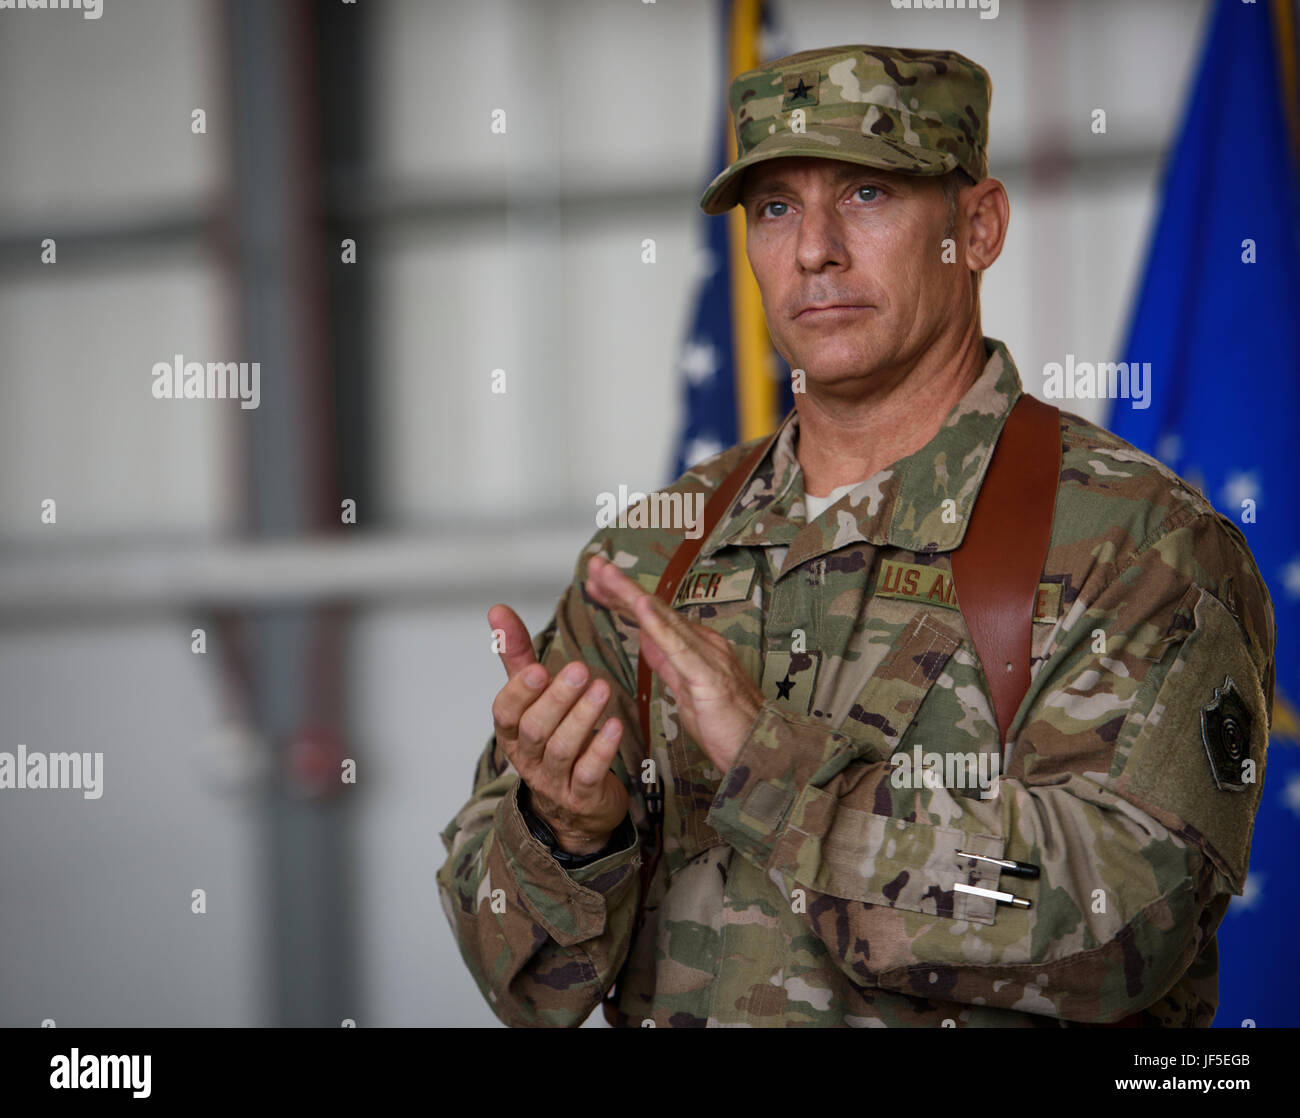 Brig. Gen. Craig Baker, the 455th Air Expeditionary Wing commander, gives a round of applause during a change of command ceremony at Bagram Airfield, Afghanistan, June 3, 2017. As the commander of the 455th AEW, Baker will lead the premier counterterrorism air mission in Afghanistan. The wing’s operations enable the NATO Resolute Support mission to successfully train, advise, and assist the military and security forces of Afghanistan, while restricting and deterring the terrorist threat in the region. (U.S. Air Force photo by Staff Sgt. Benjamin Gonsier) Stock Photo